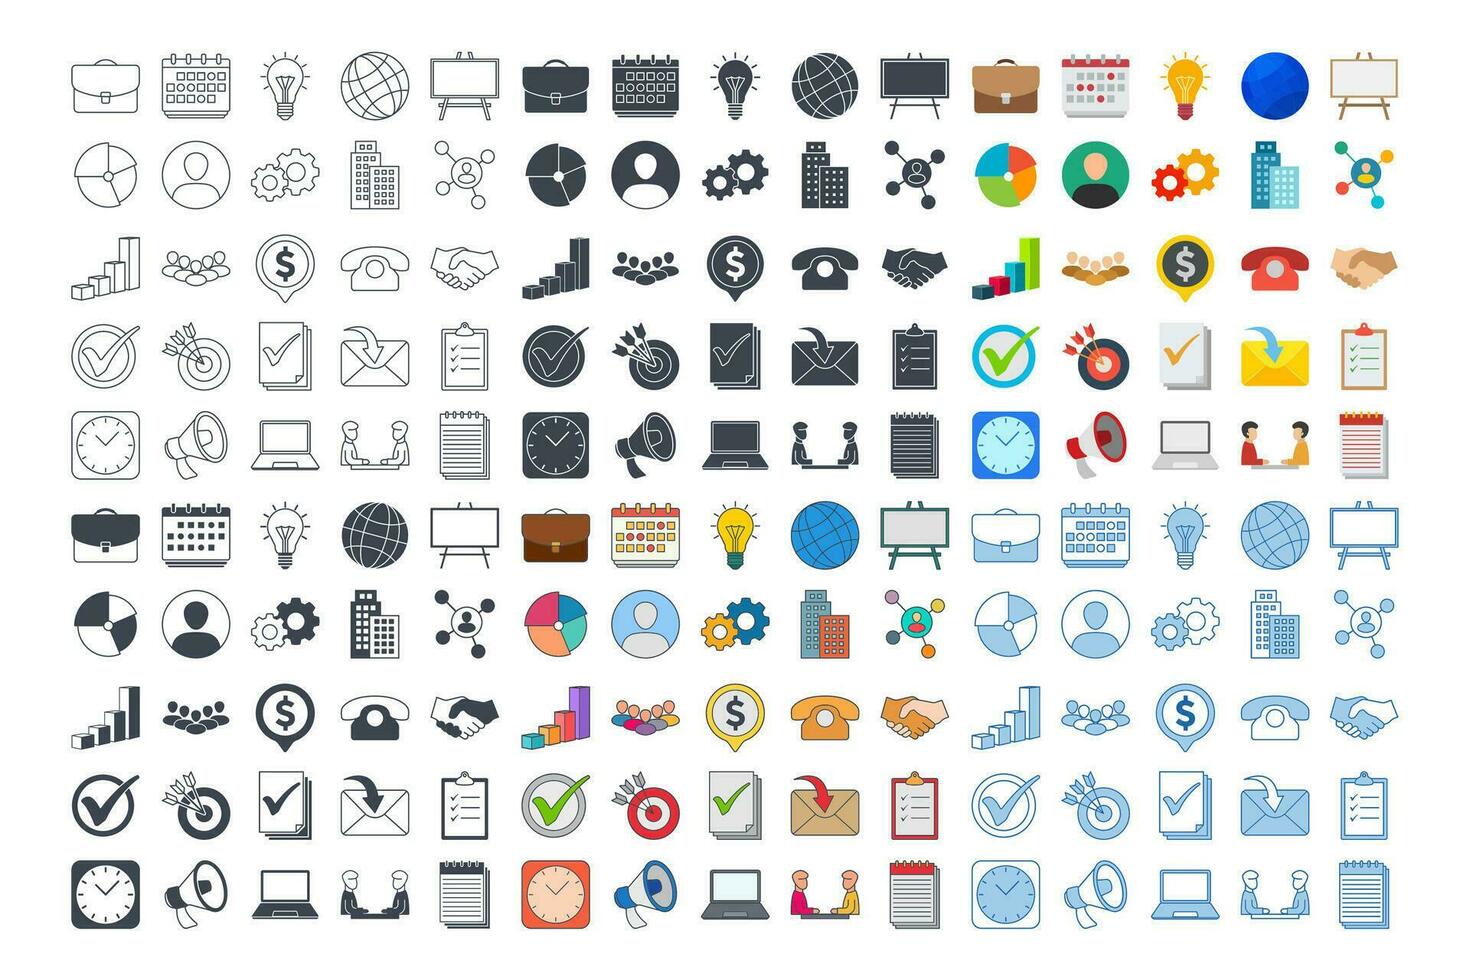 A comprehensive collection of 150 vector icons representing various aspects of business management. Perfect for enhancing presentations, websites, or any design related to business management